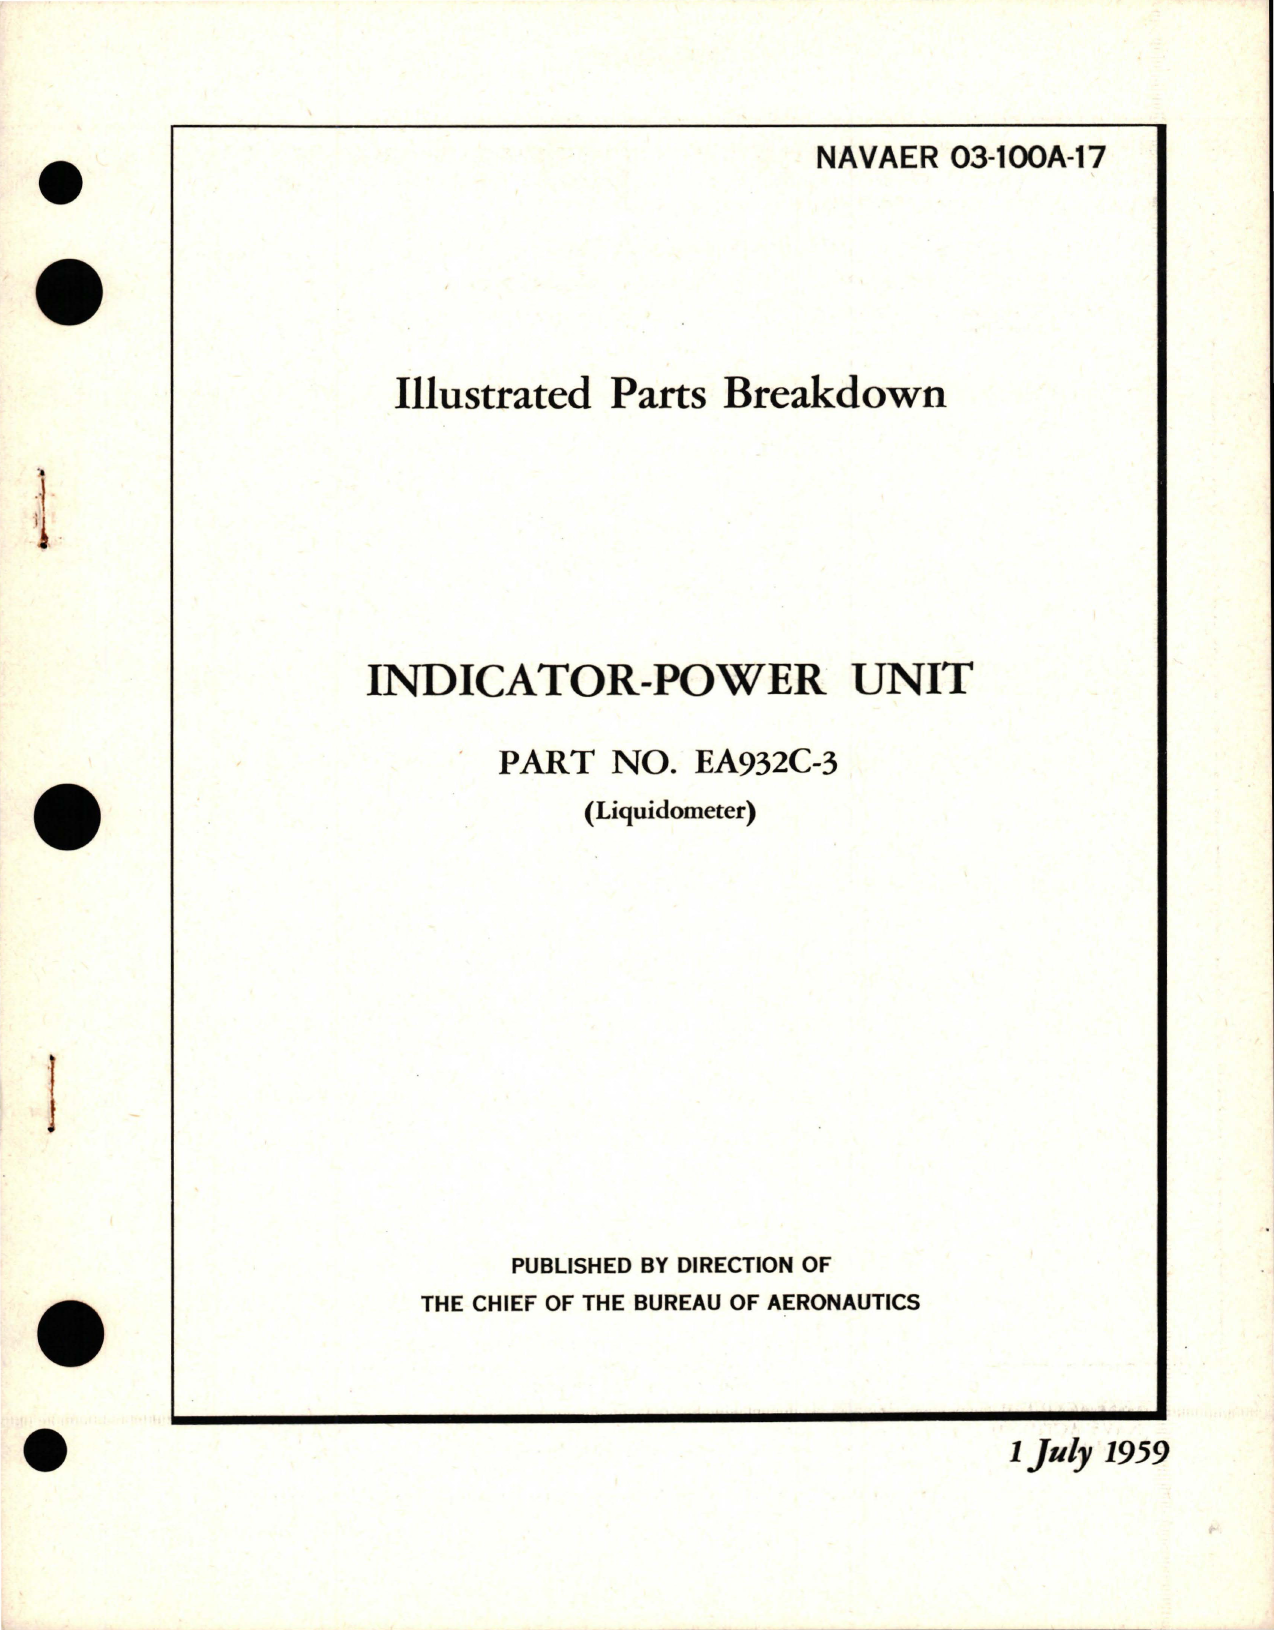 Sample page 1 from AirCorps Library document: Illustrated Parts Breakdown for Indicator Power Unit - Part EA932C-3